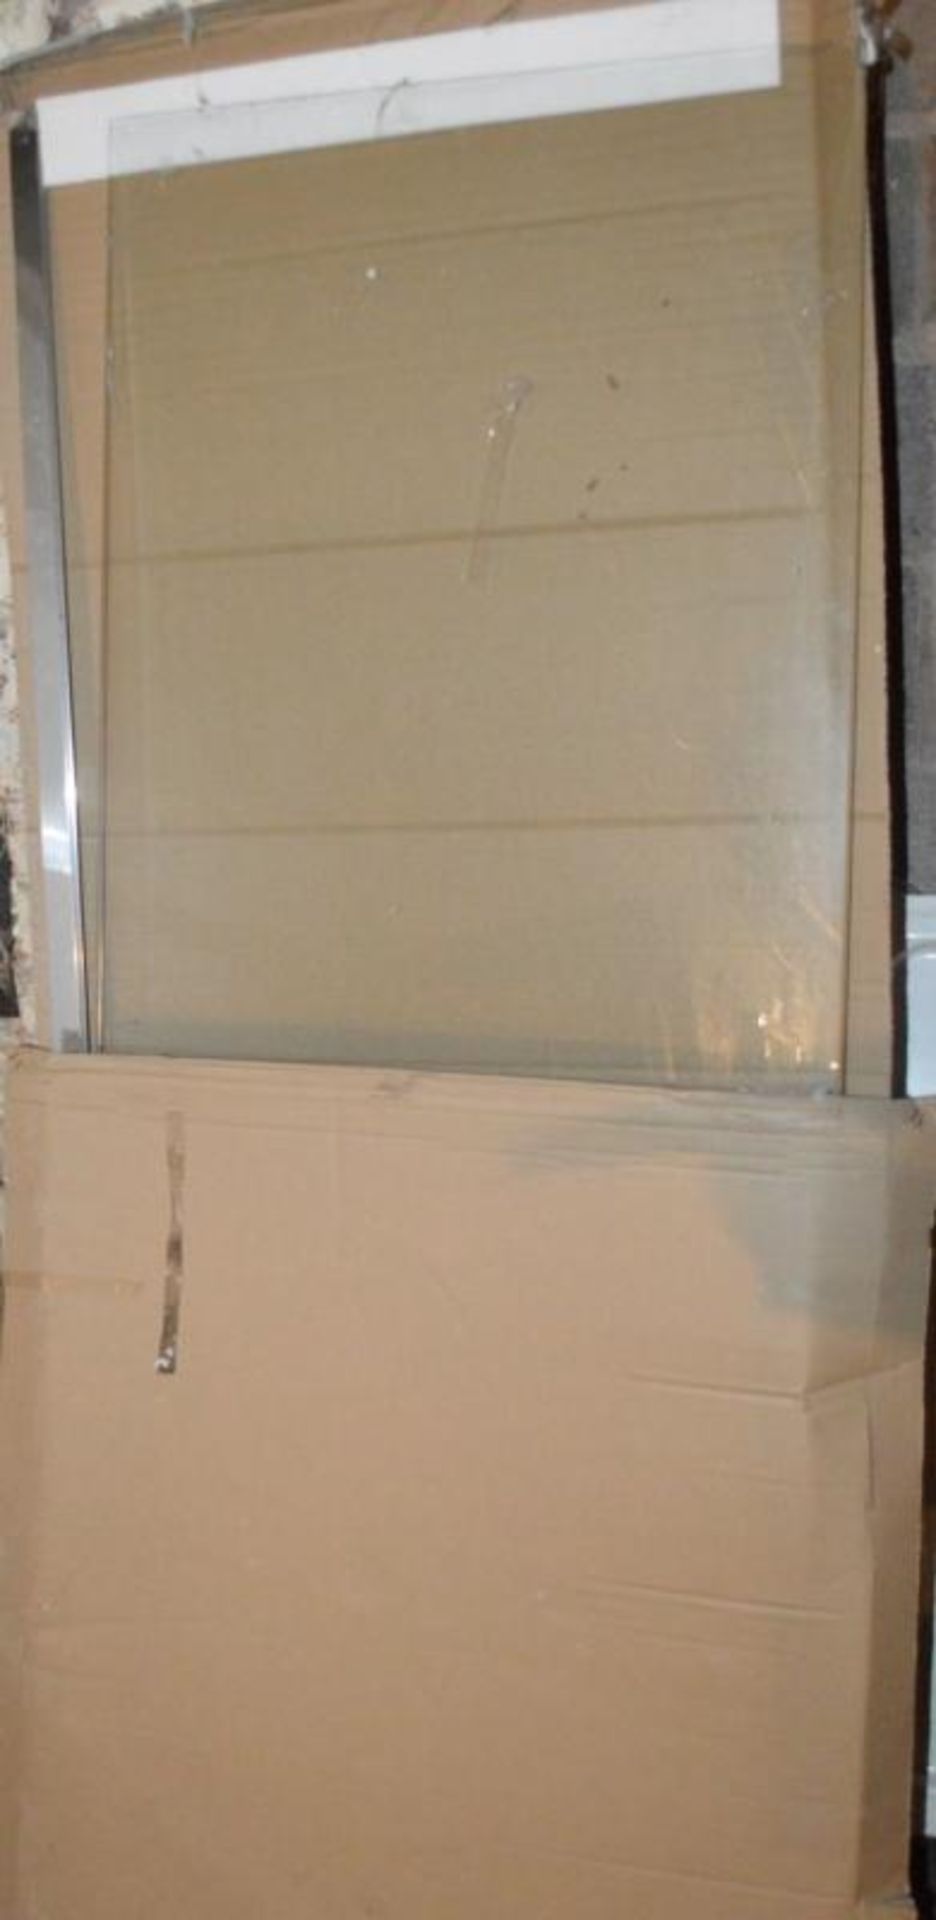 13 x Assorted Shower Screens And Panels - RefMT787 + Ref731 - New / Unused Boxed Stock - CL269 - Loc - Image 6 of 9